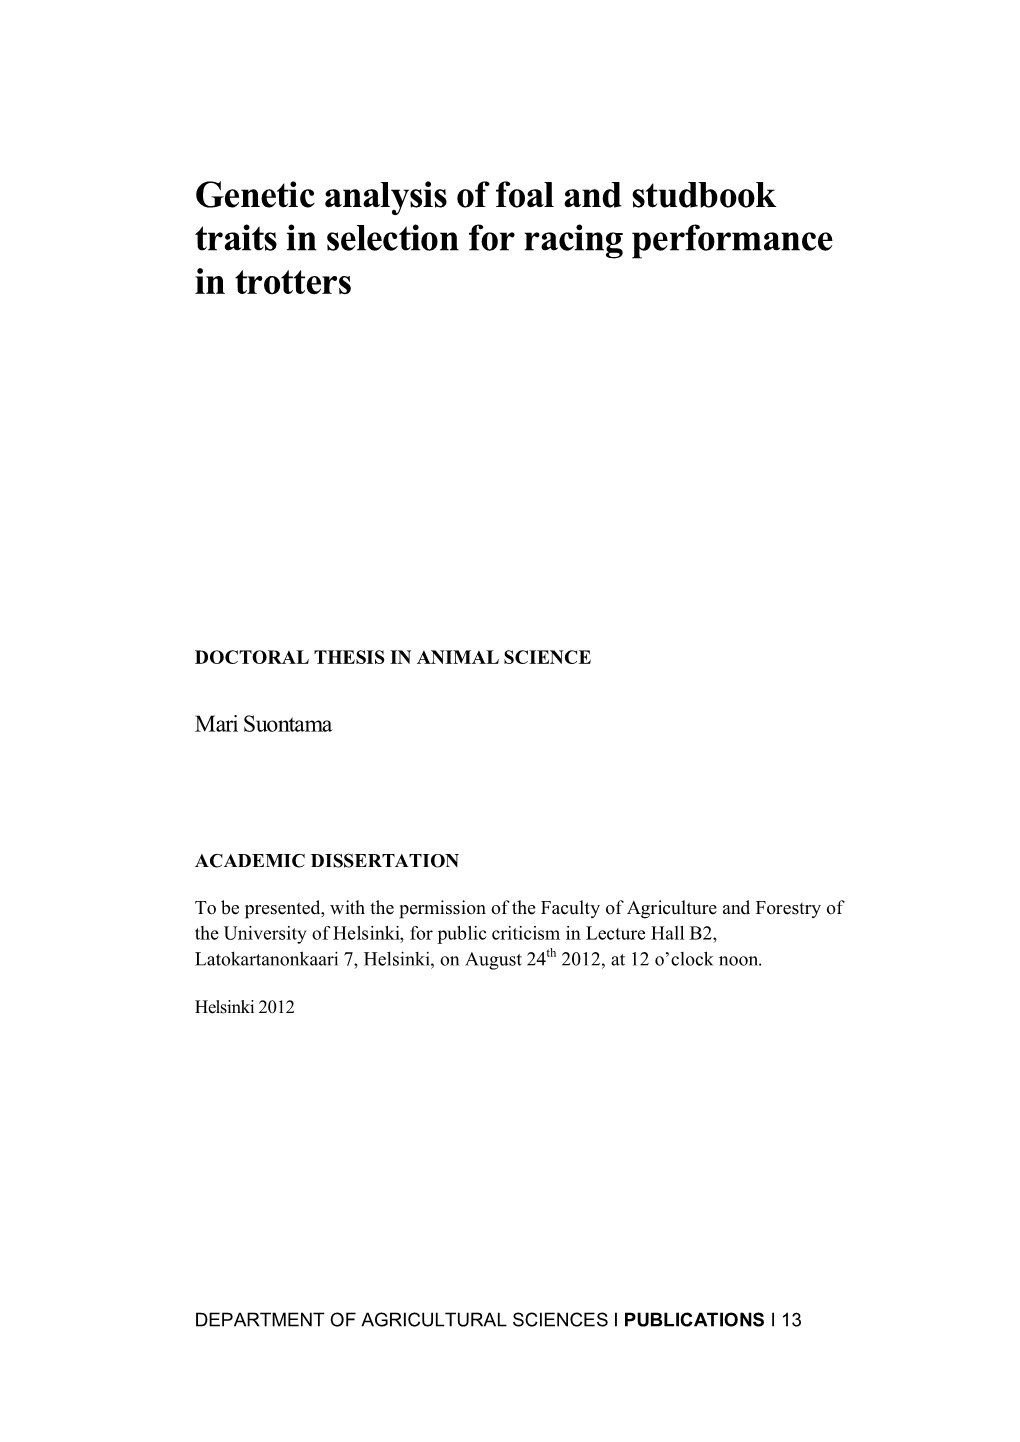 Genetic Analysis of Foal and Studbook Traits in Selection for Racing Performance in Trotters